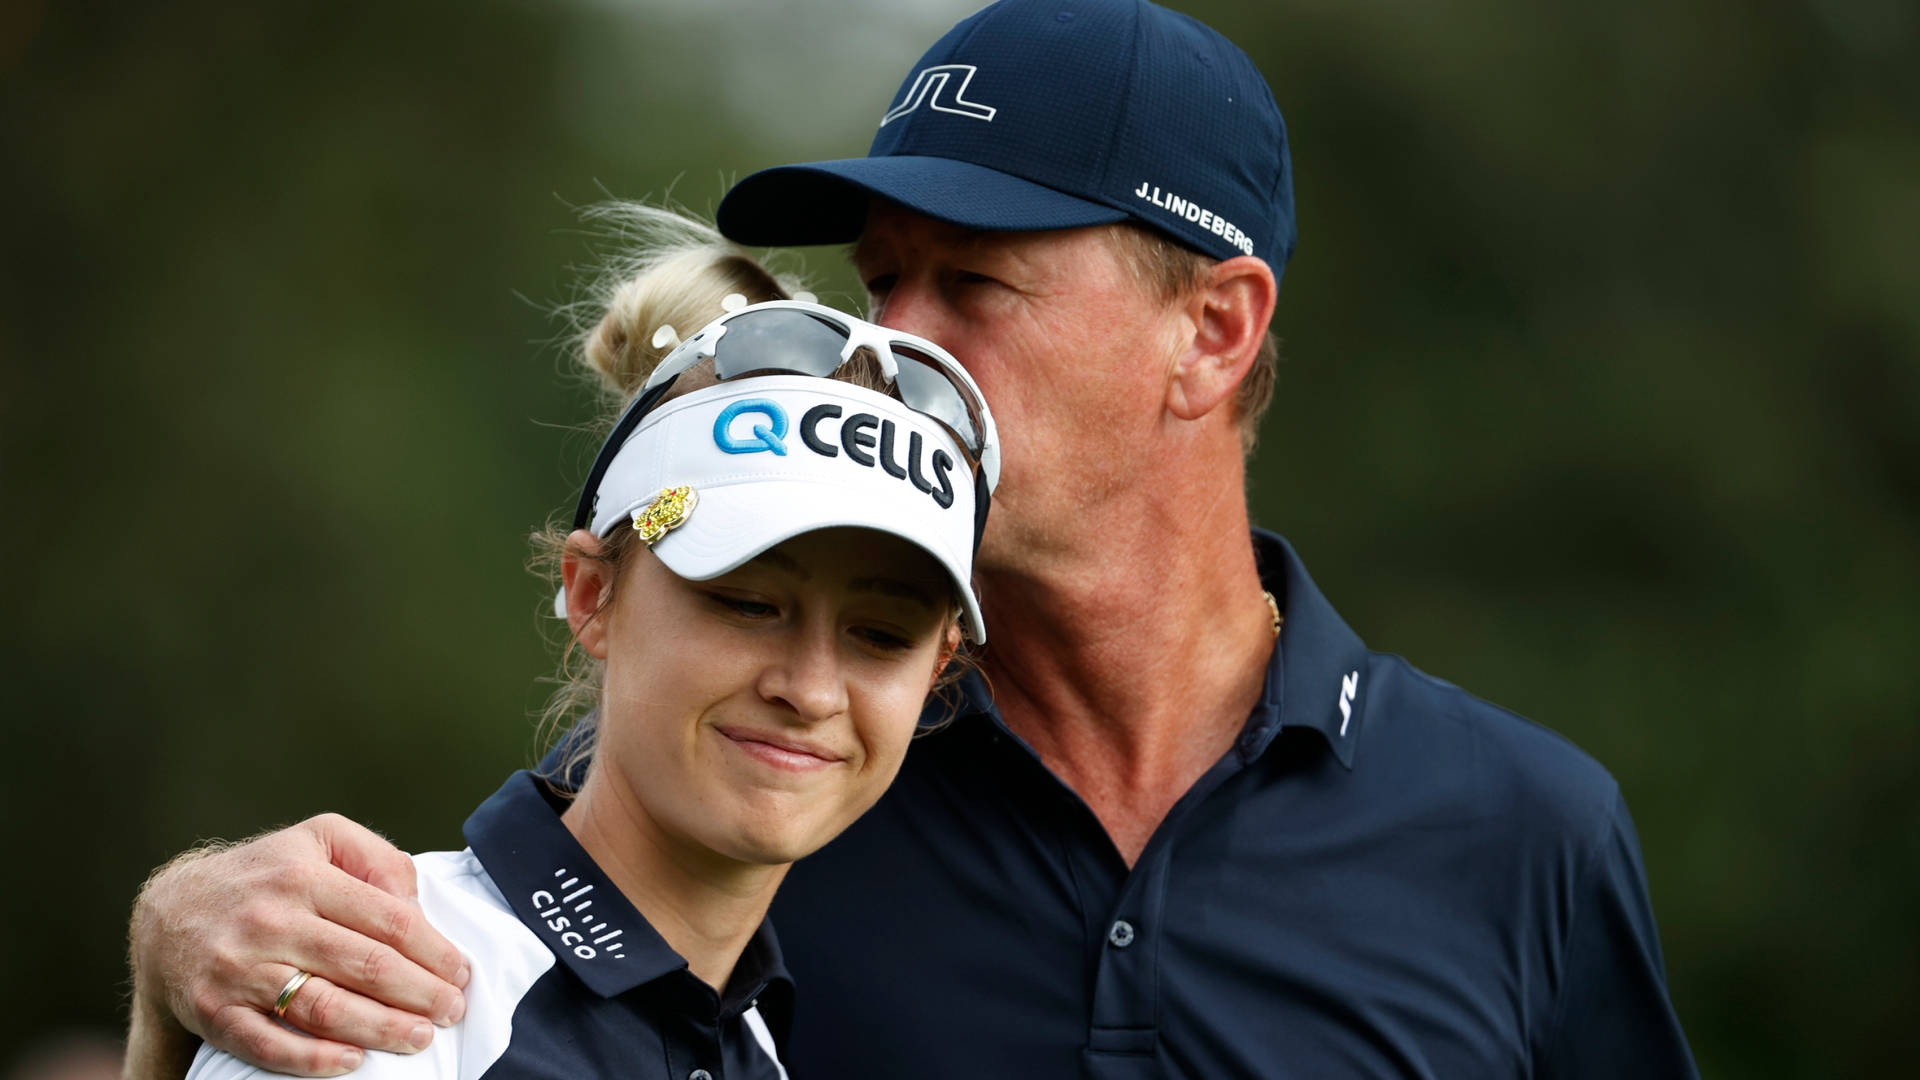 Petr Korda Shares a Tender Moment with Daughter Wallpaper